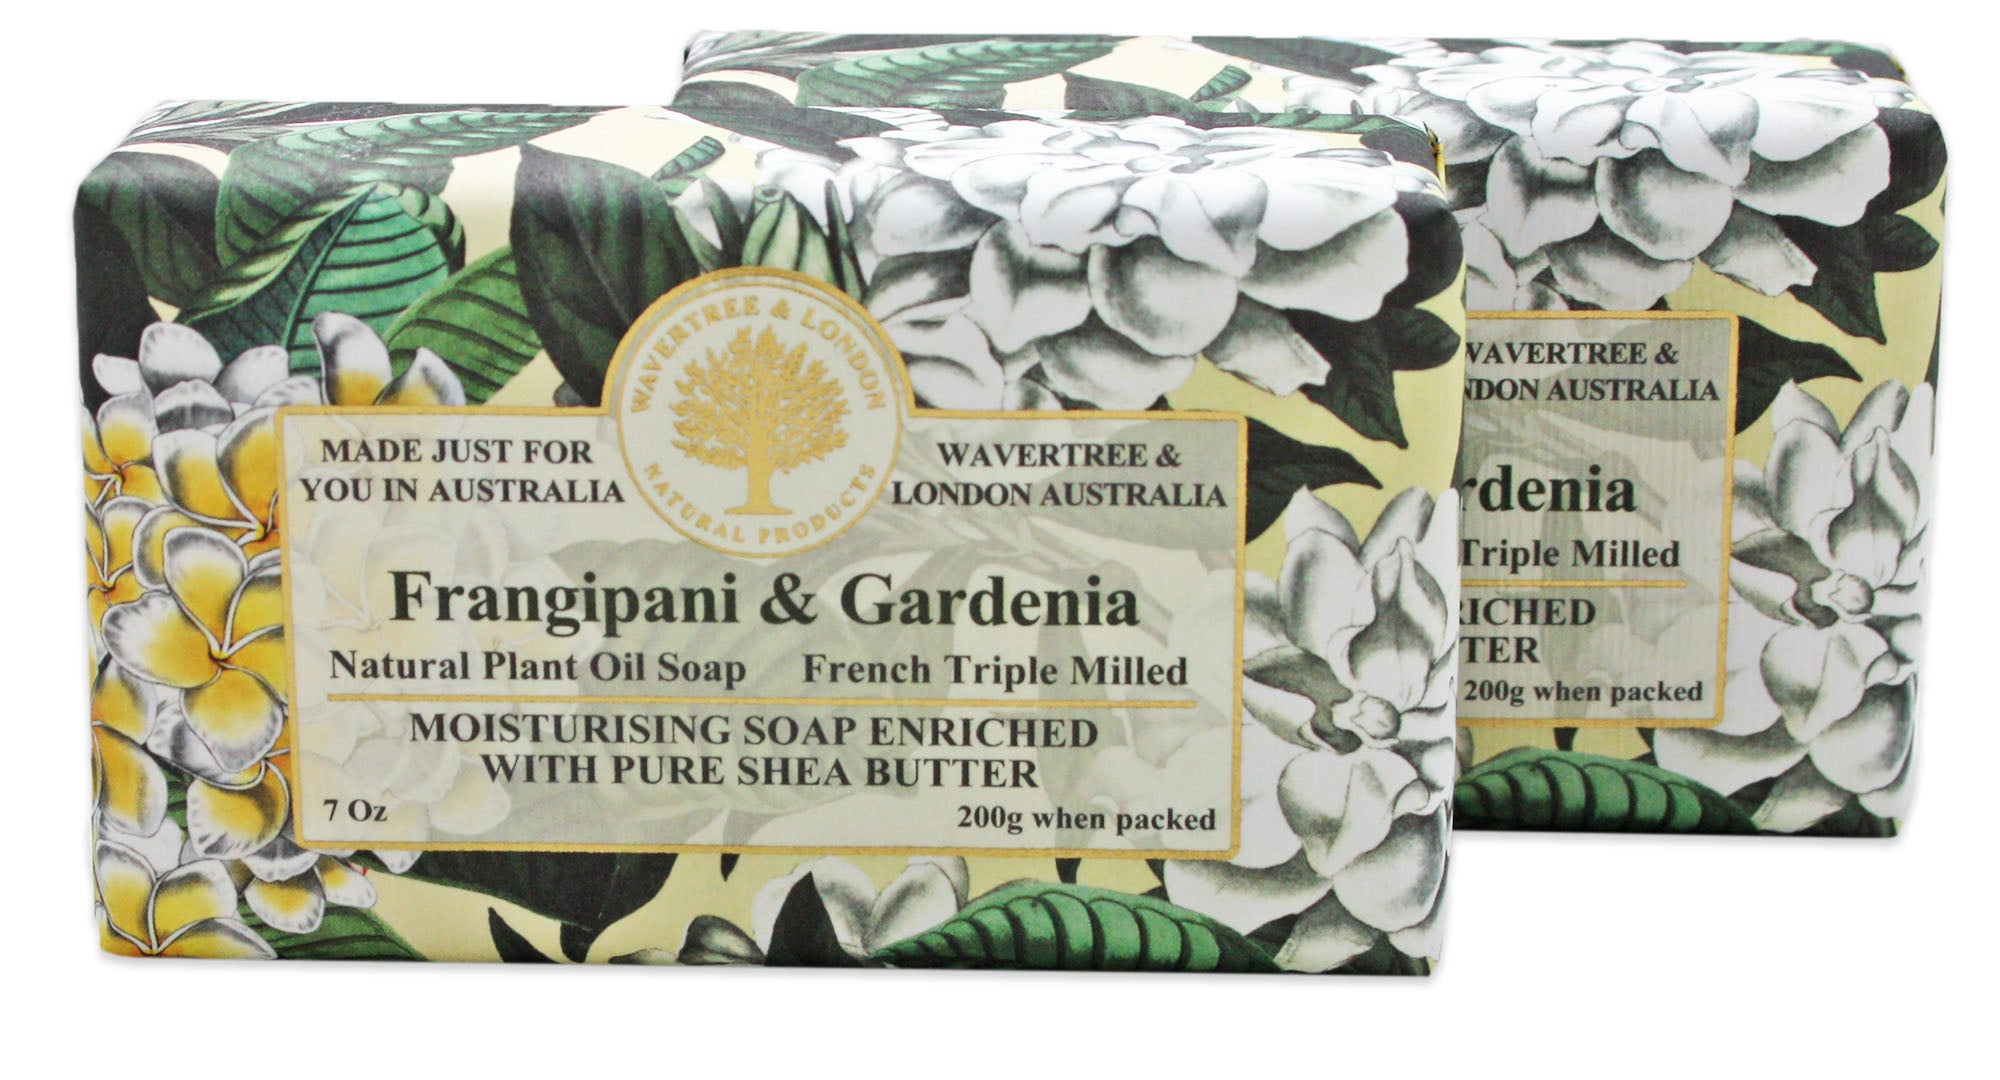 Wavertree & London Natural Plant Oil French Triple Milled Moisturizing Soap with Pure Shea Butter 7 oz each Frangipani & Gardenia (2-Pack)